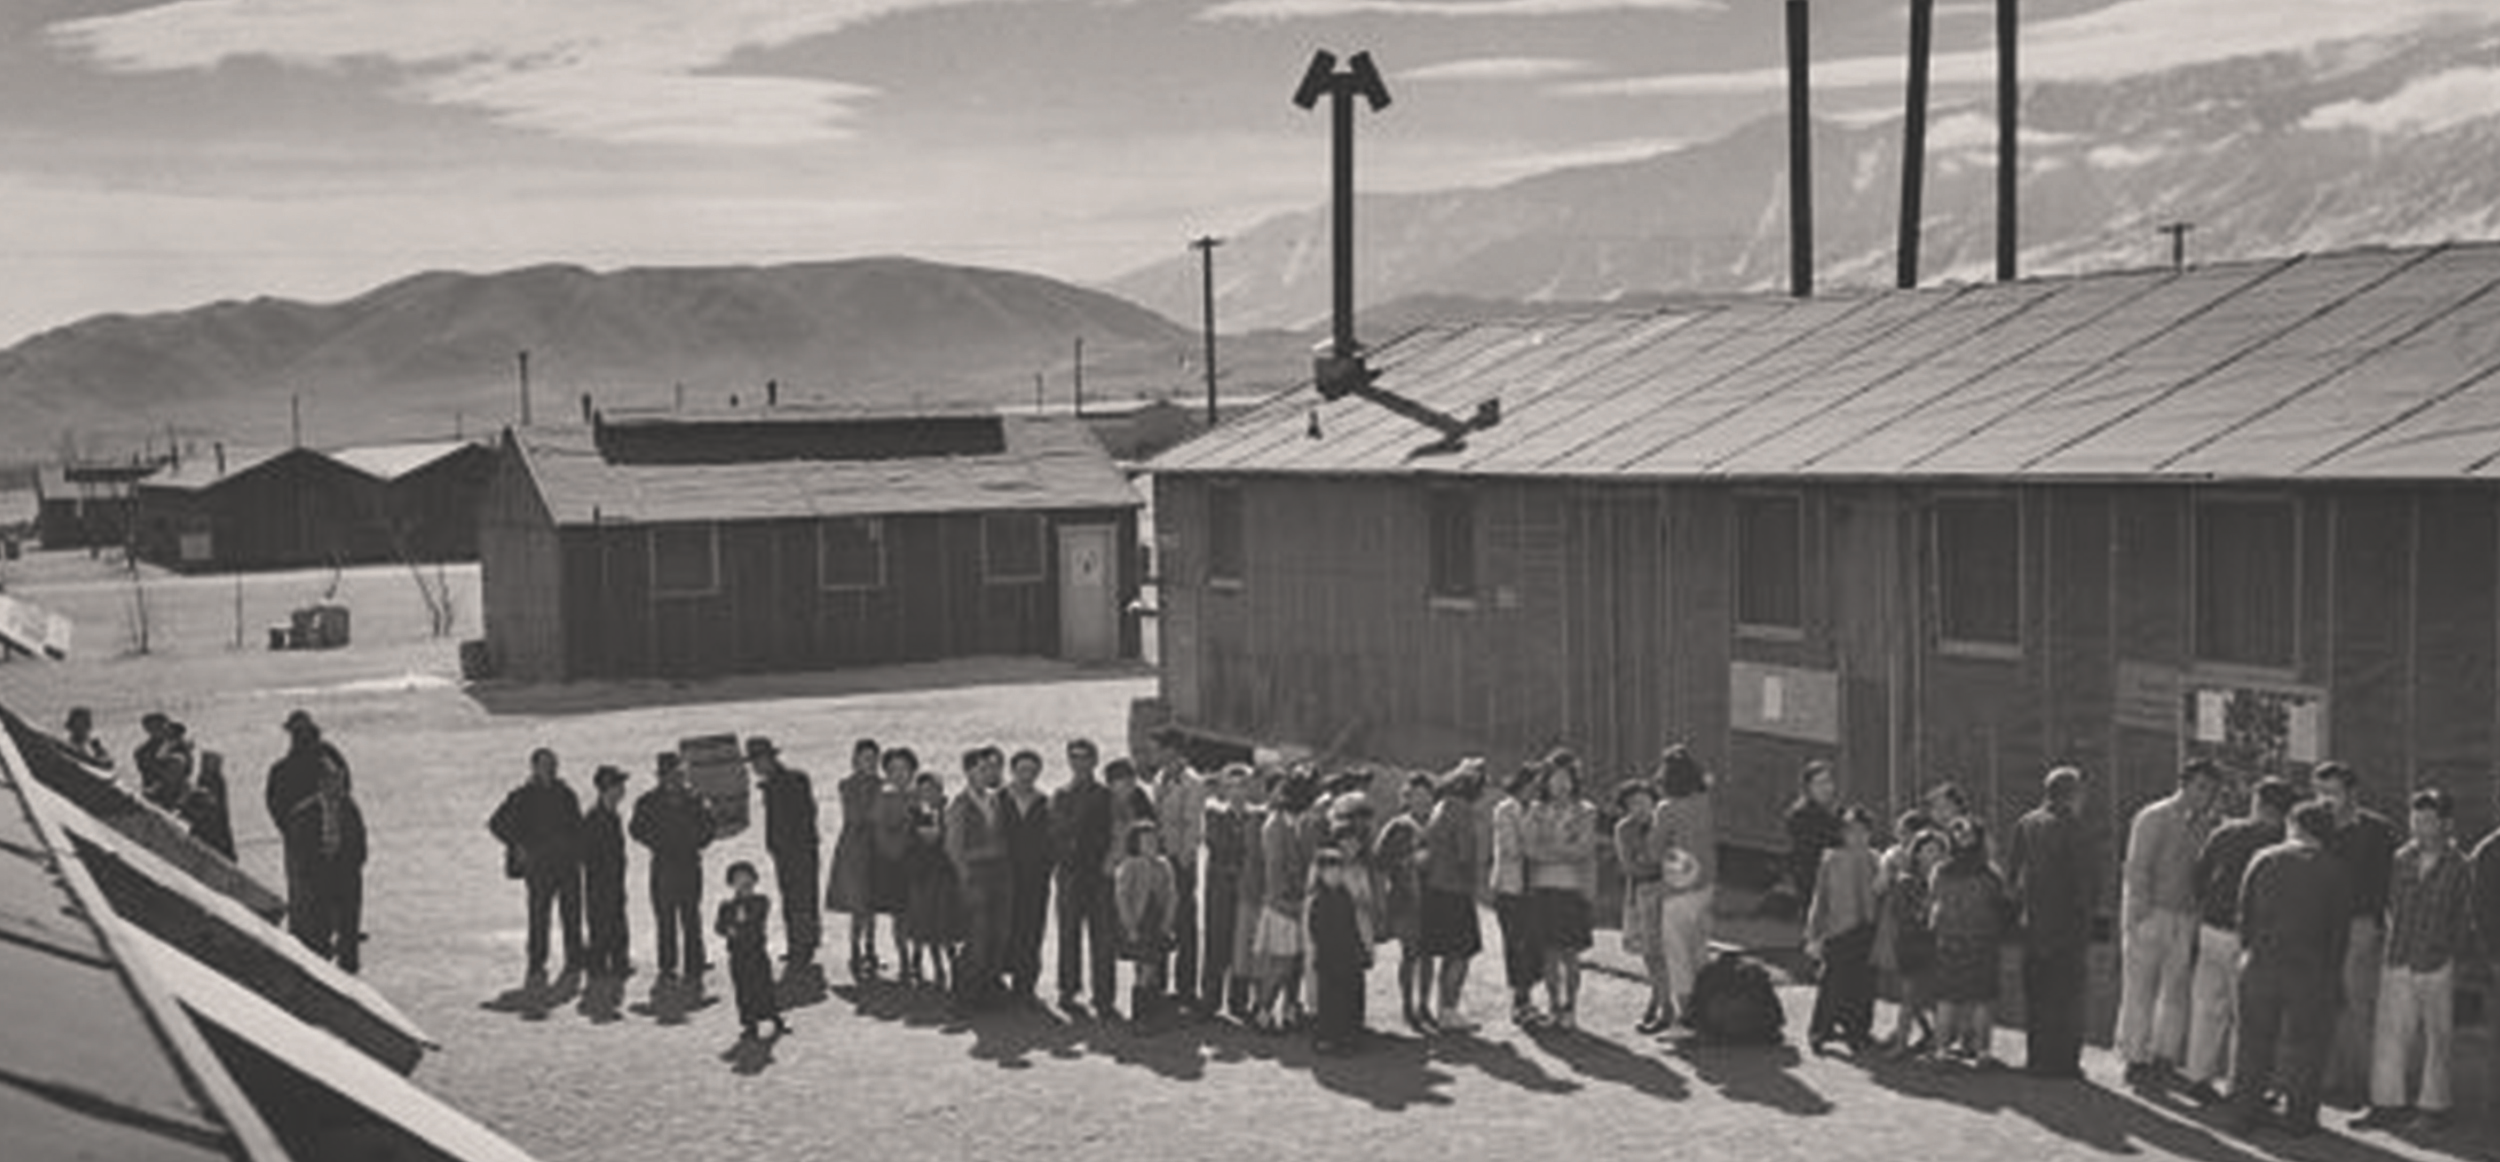 Japanese-Americans lined up at an internment camp